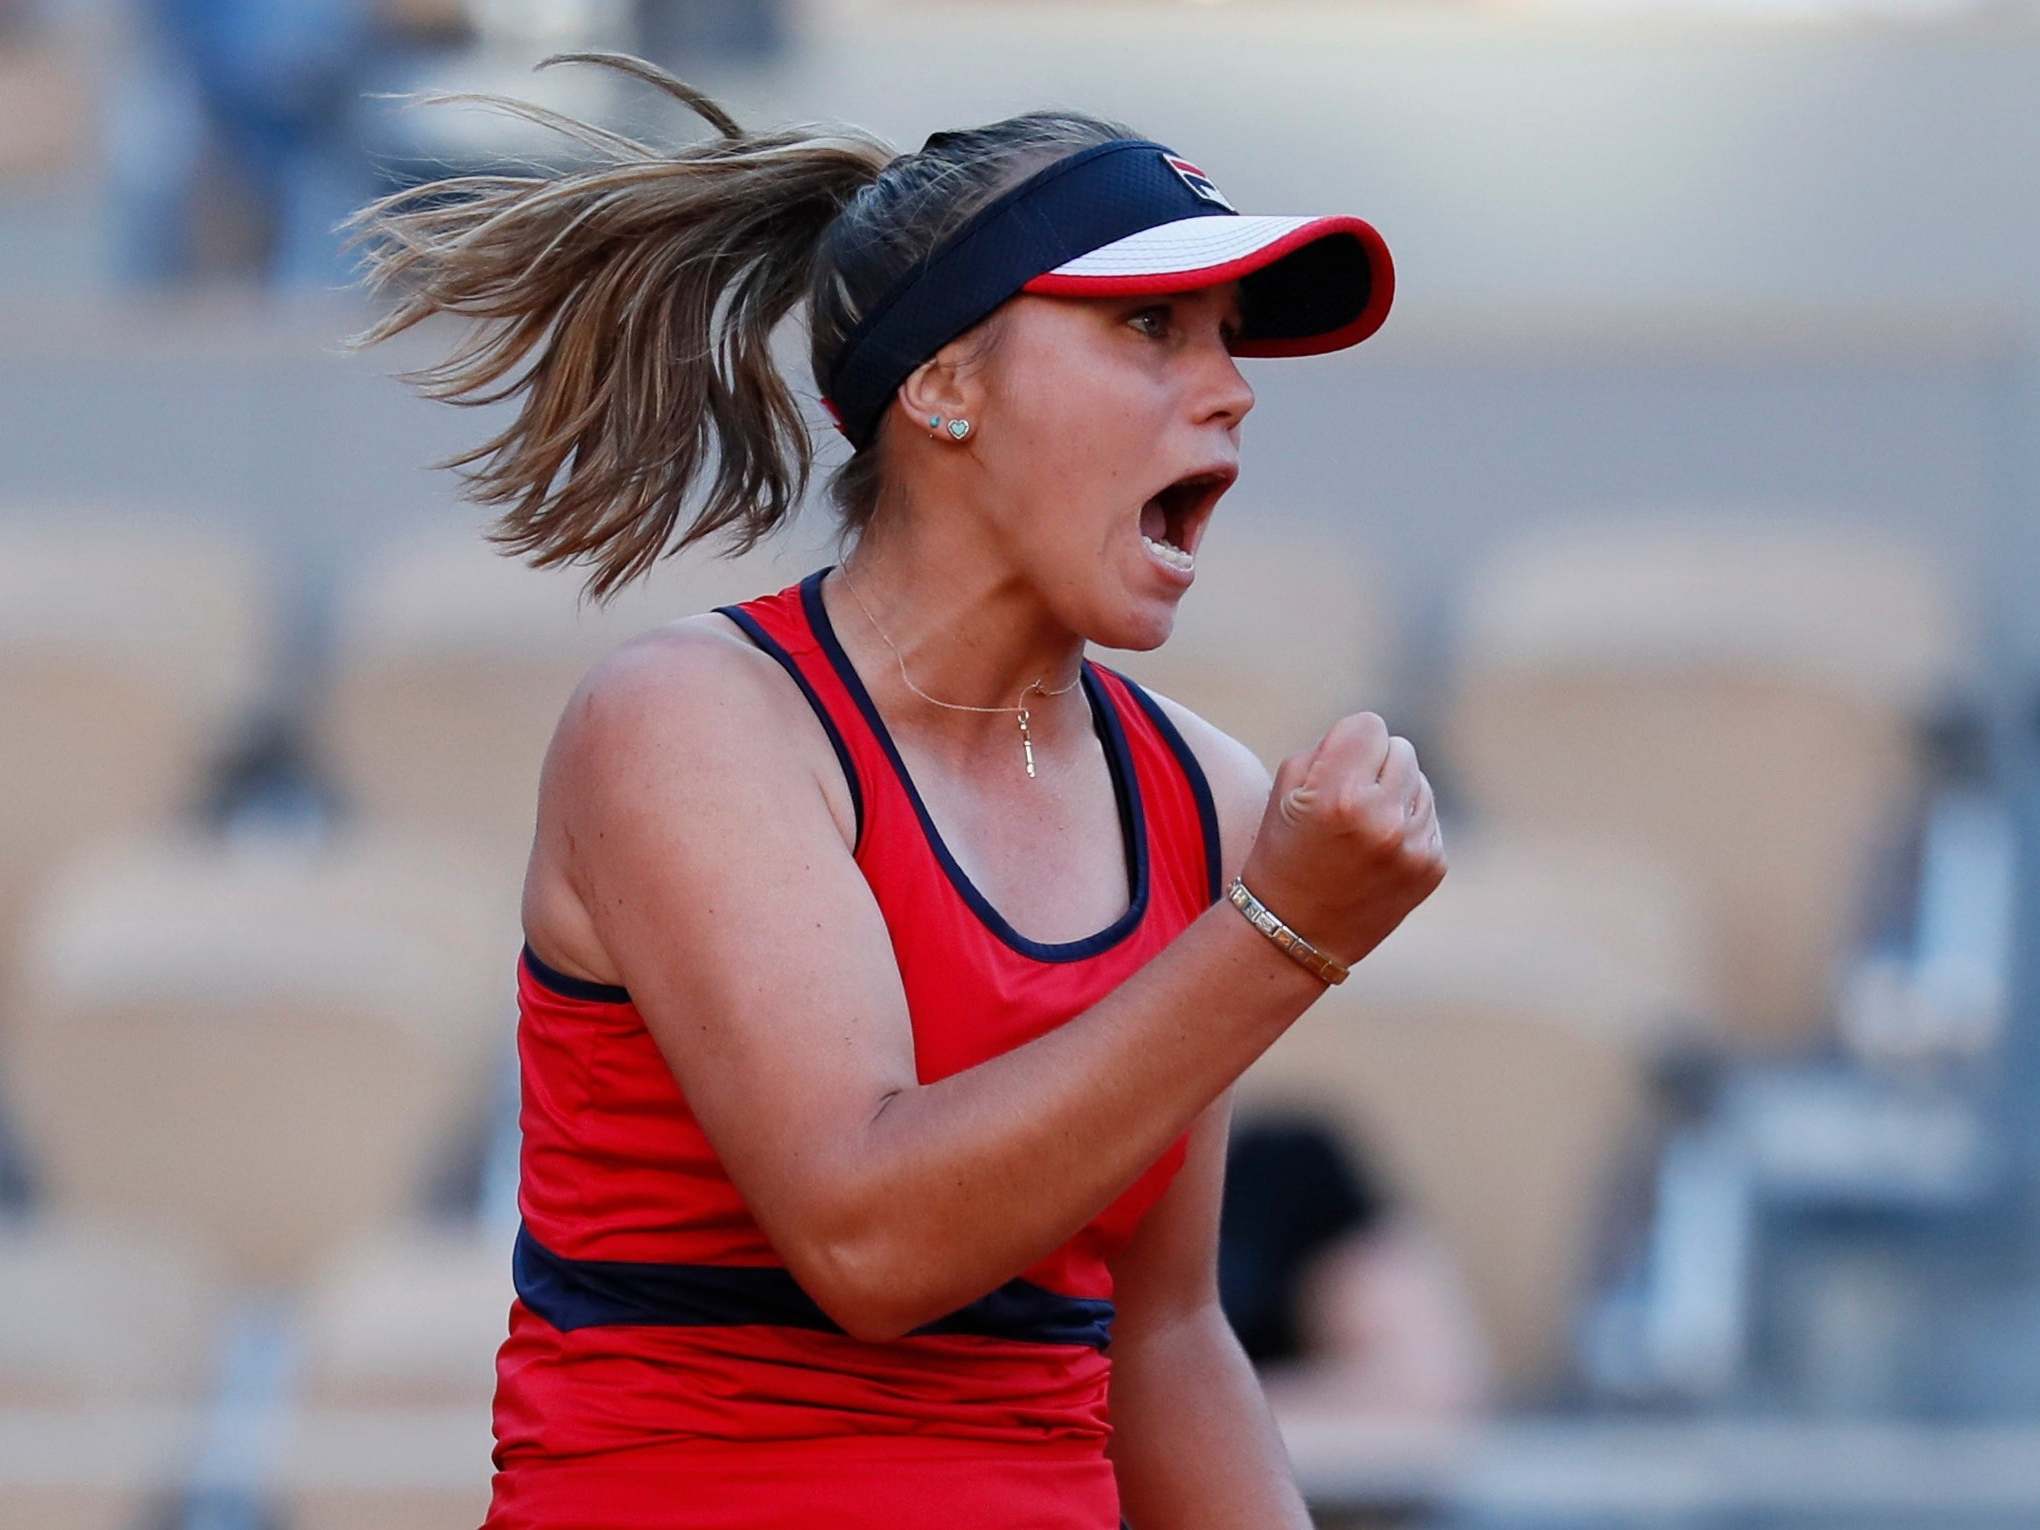 French Open 2019: Serena Williams stunned by 20-year-old Sofia Kenin in third round at ...